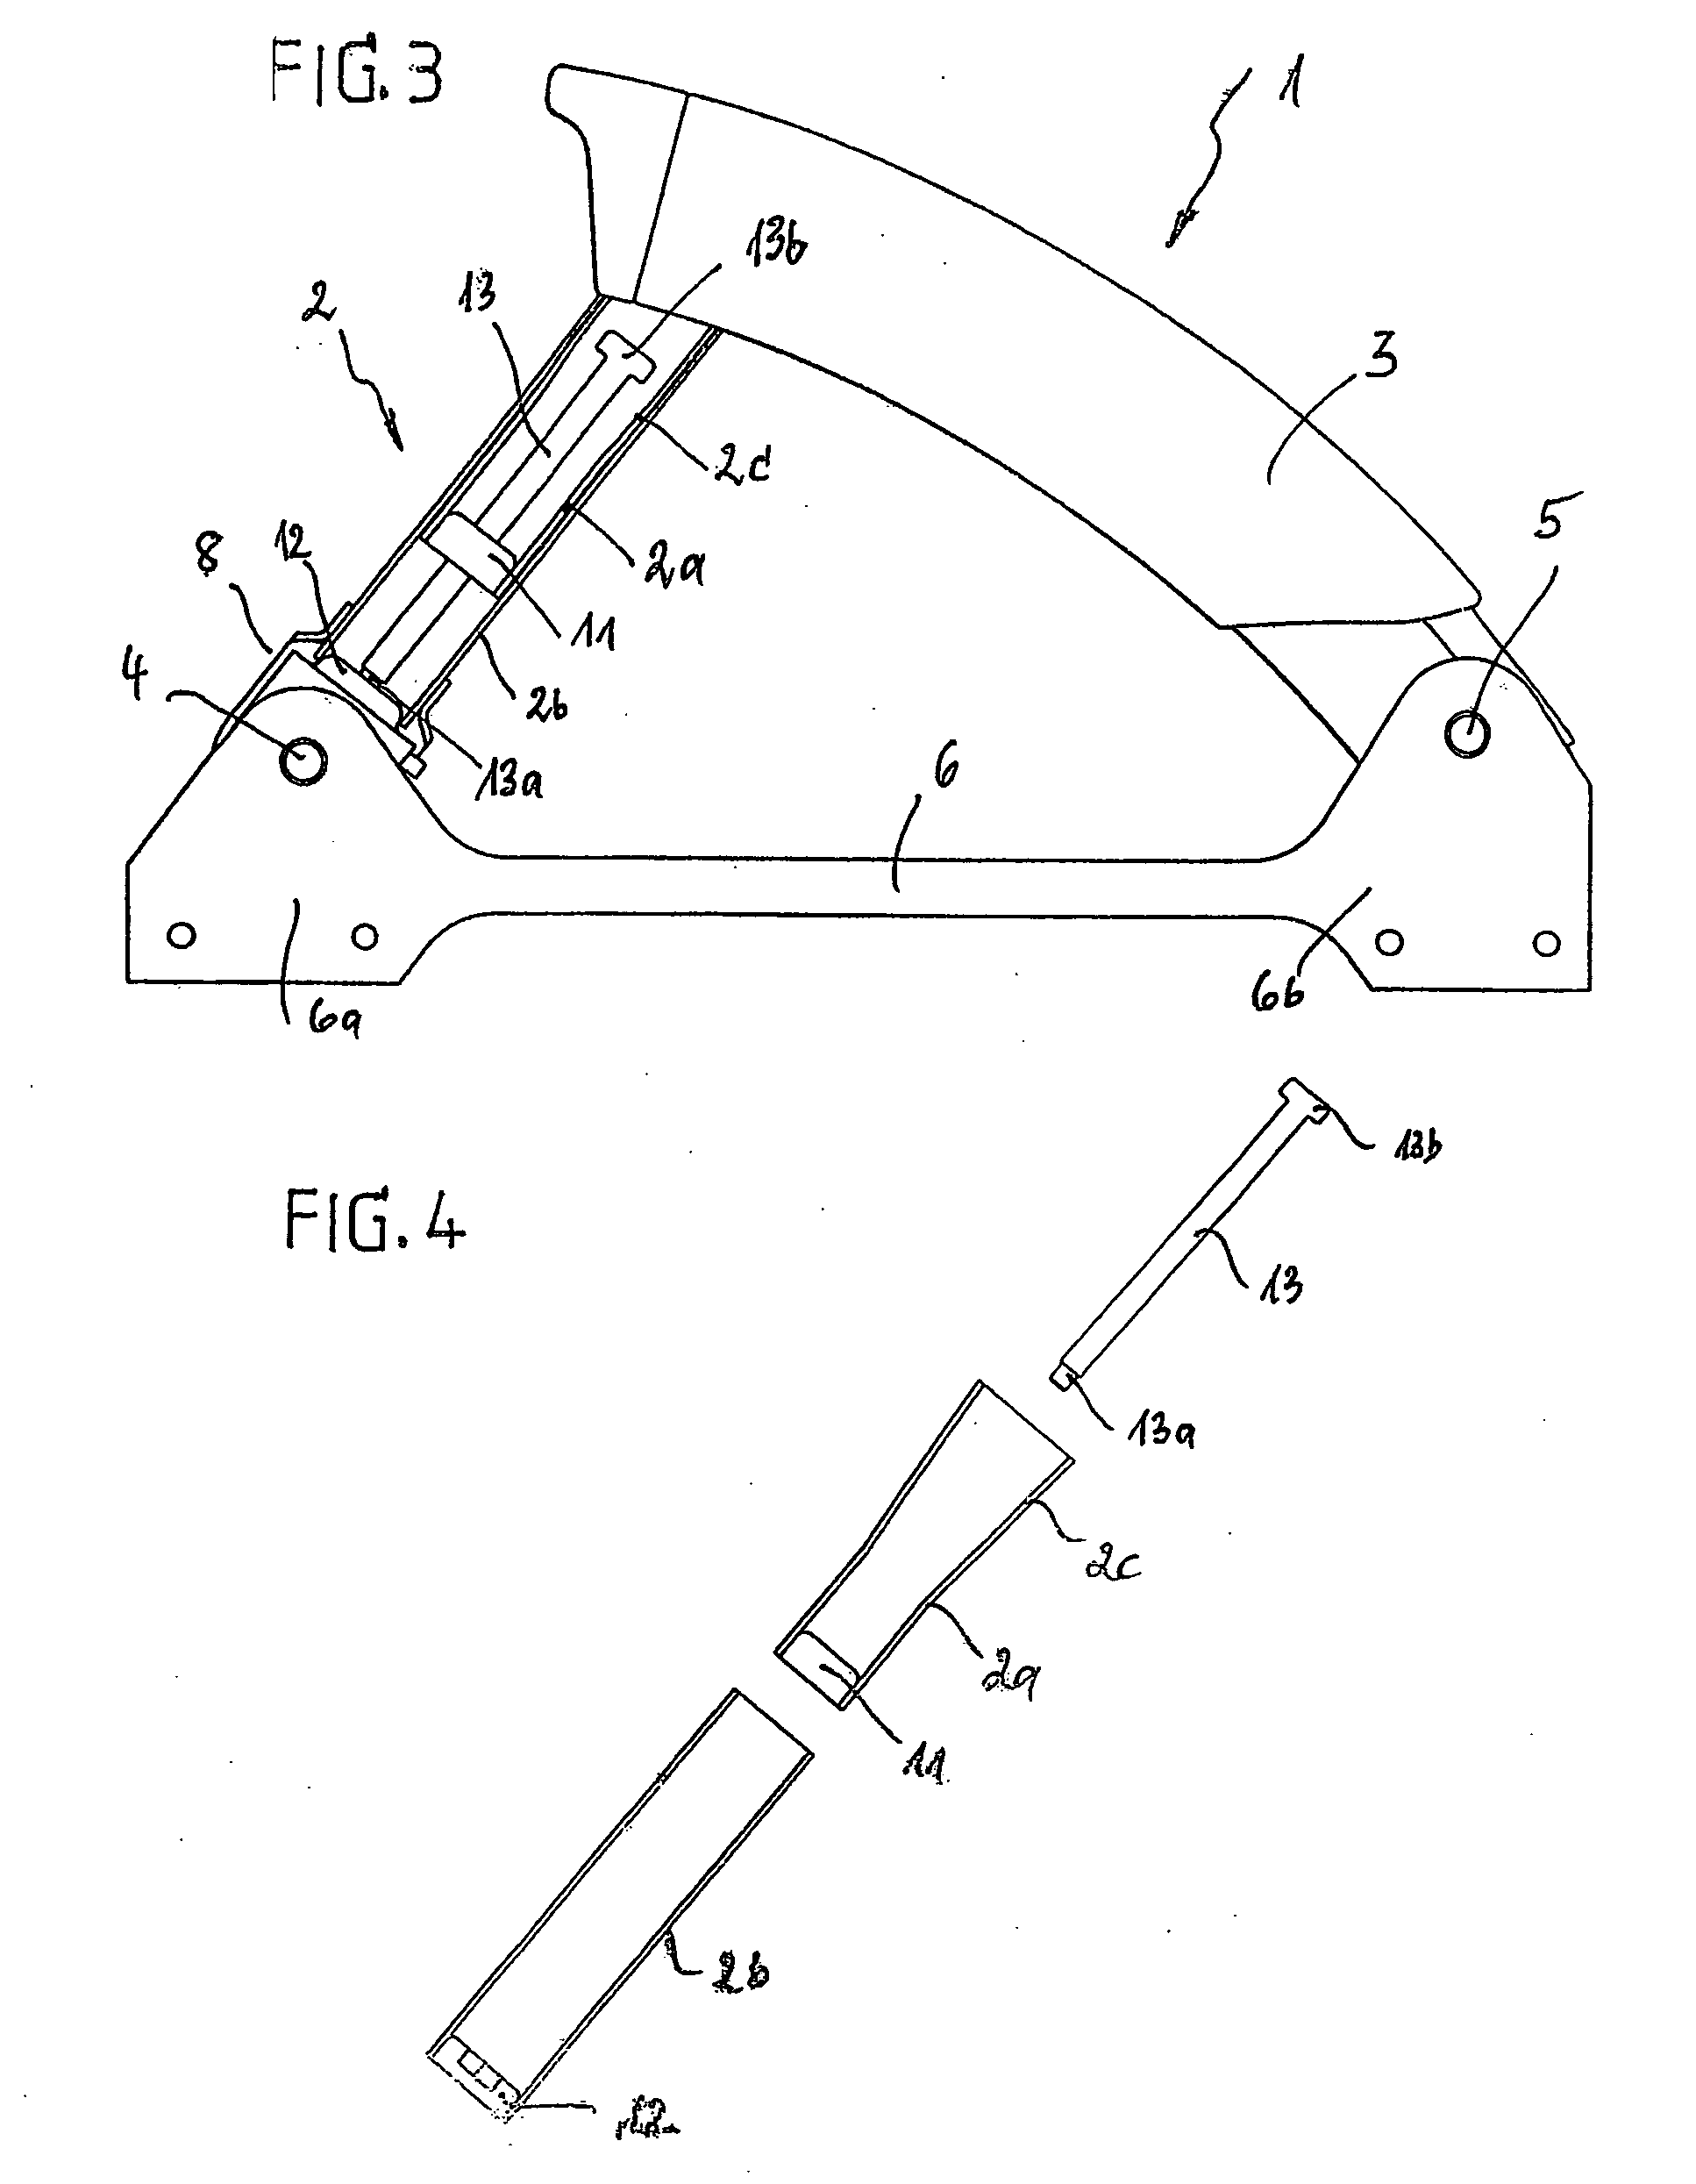 Rollover protection system for motor vehicles with an actively deployable rollover body